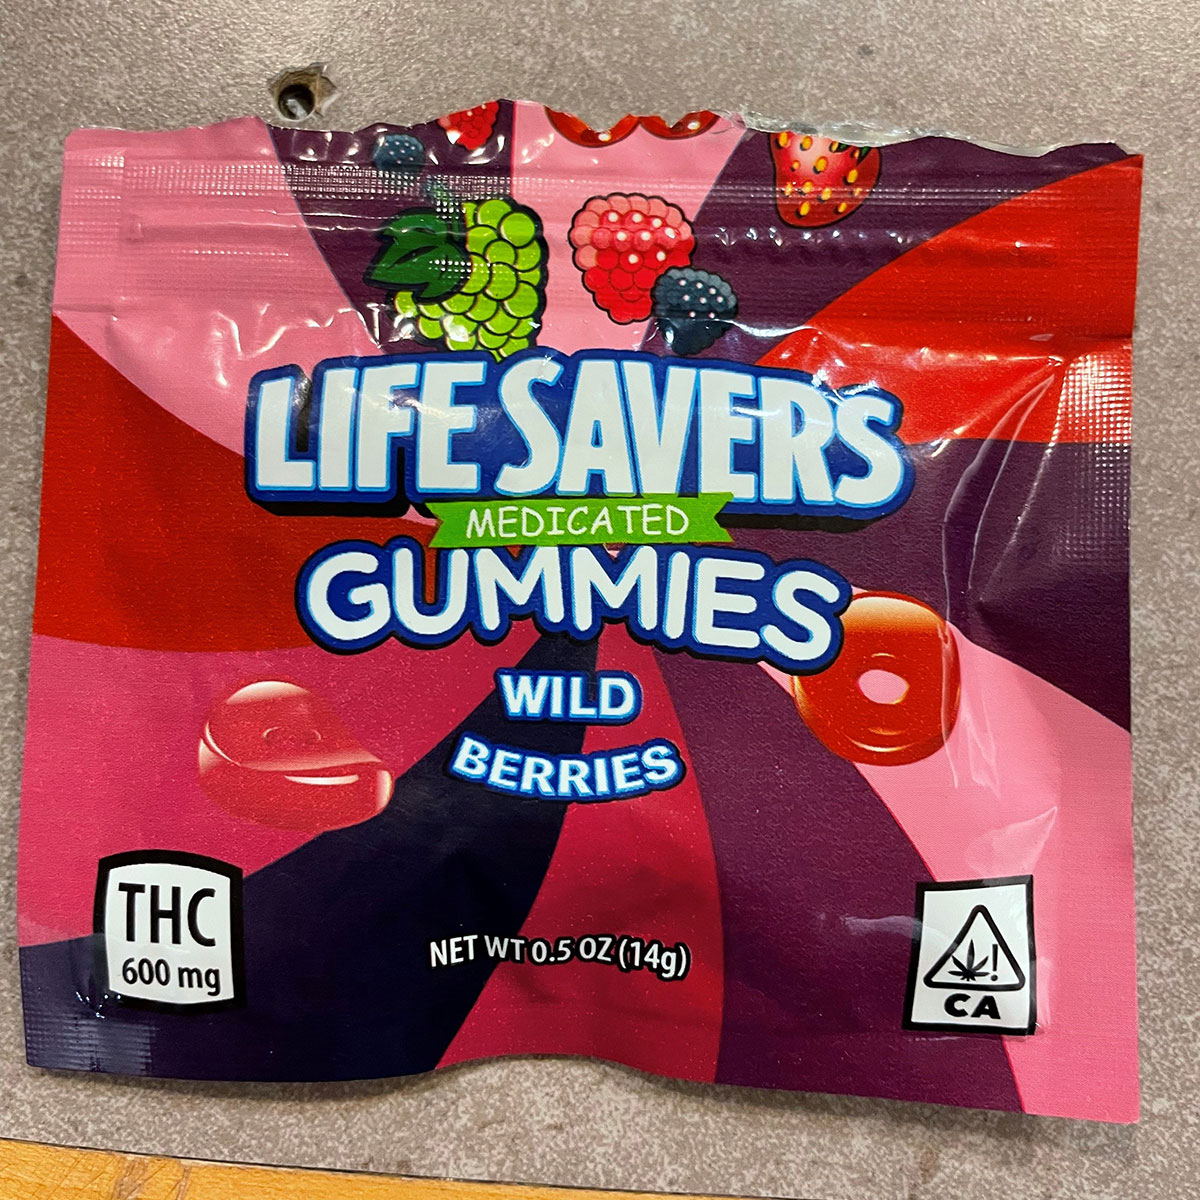 A package of medicated Lifesaver gummies